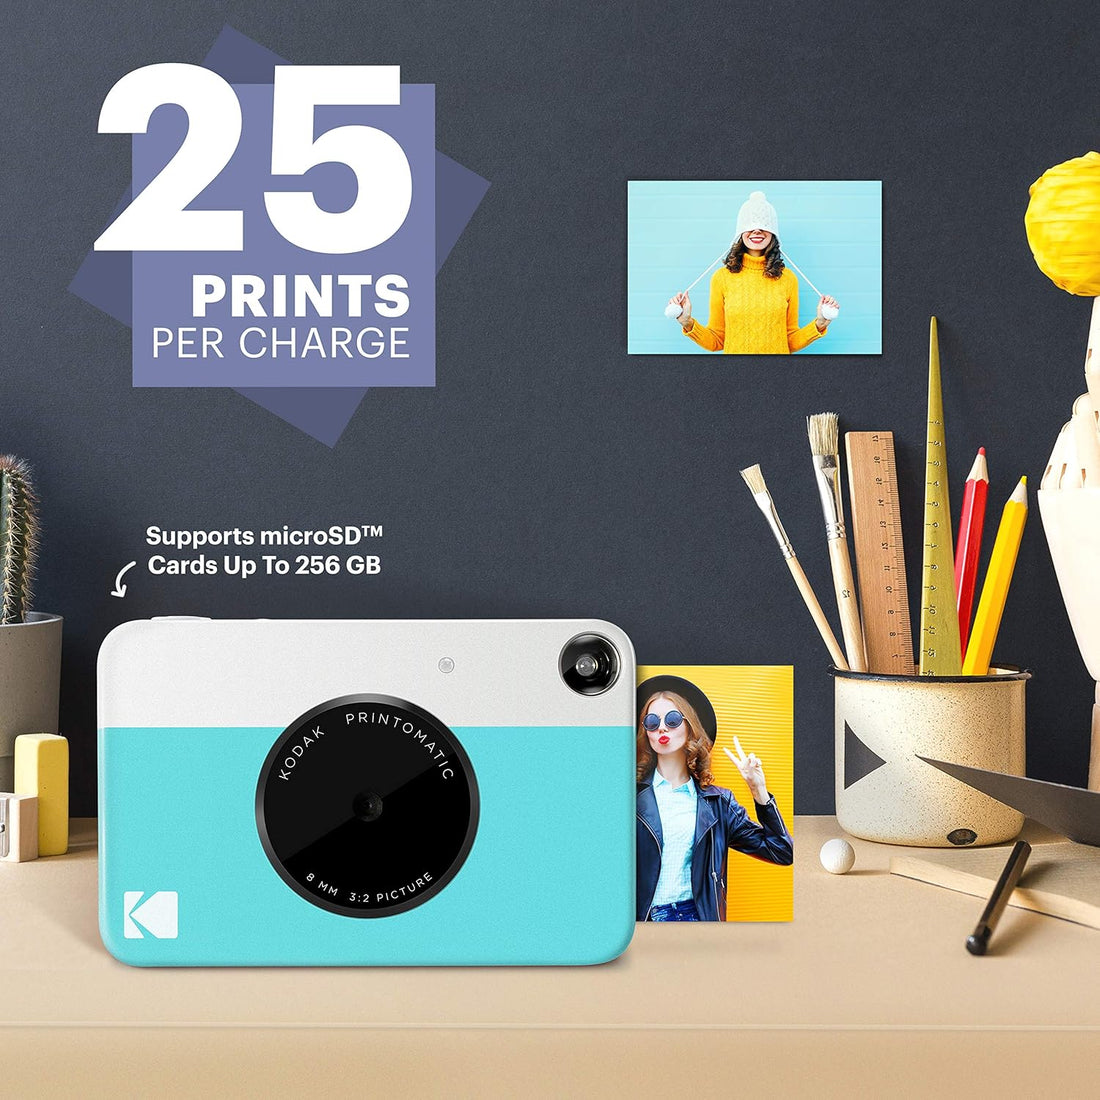 Kodak PRINTOMATIC Digital Instant Print Camera (Blue), Full Color Prints On Zink 2x3 Sticky-Backed Photo Paper - Print Memories Instantly